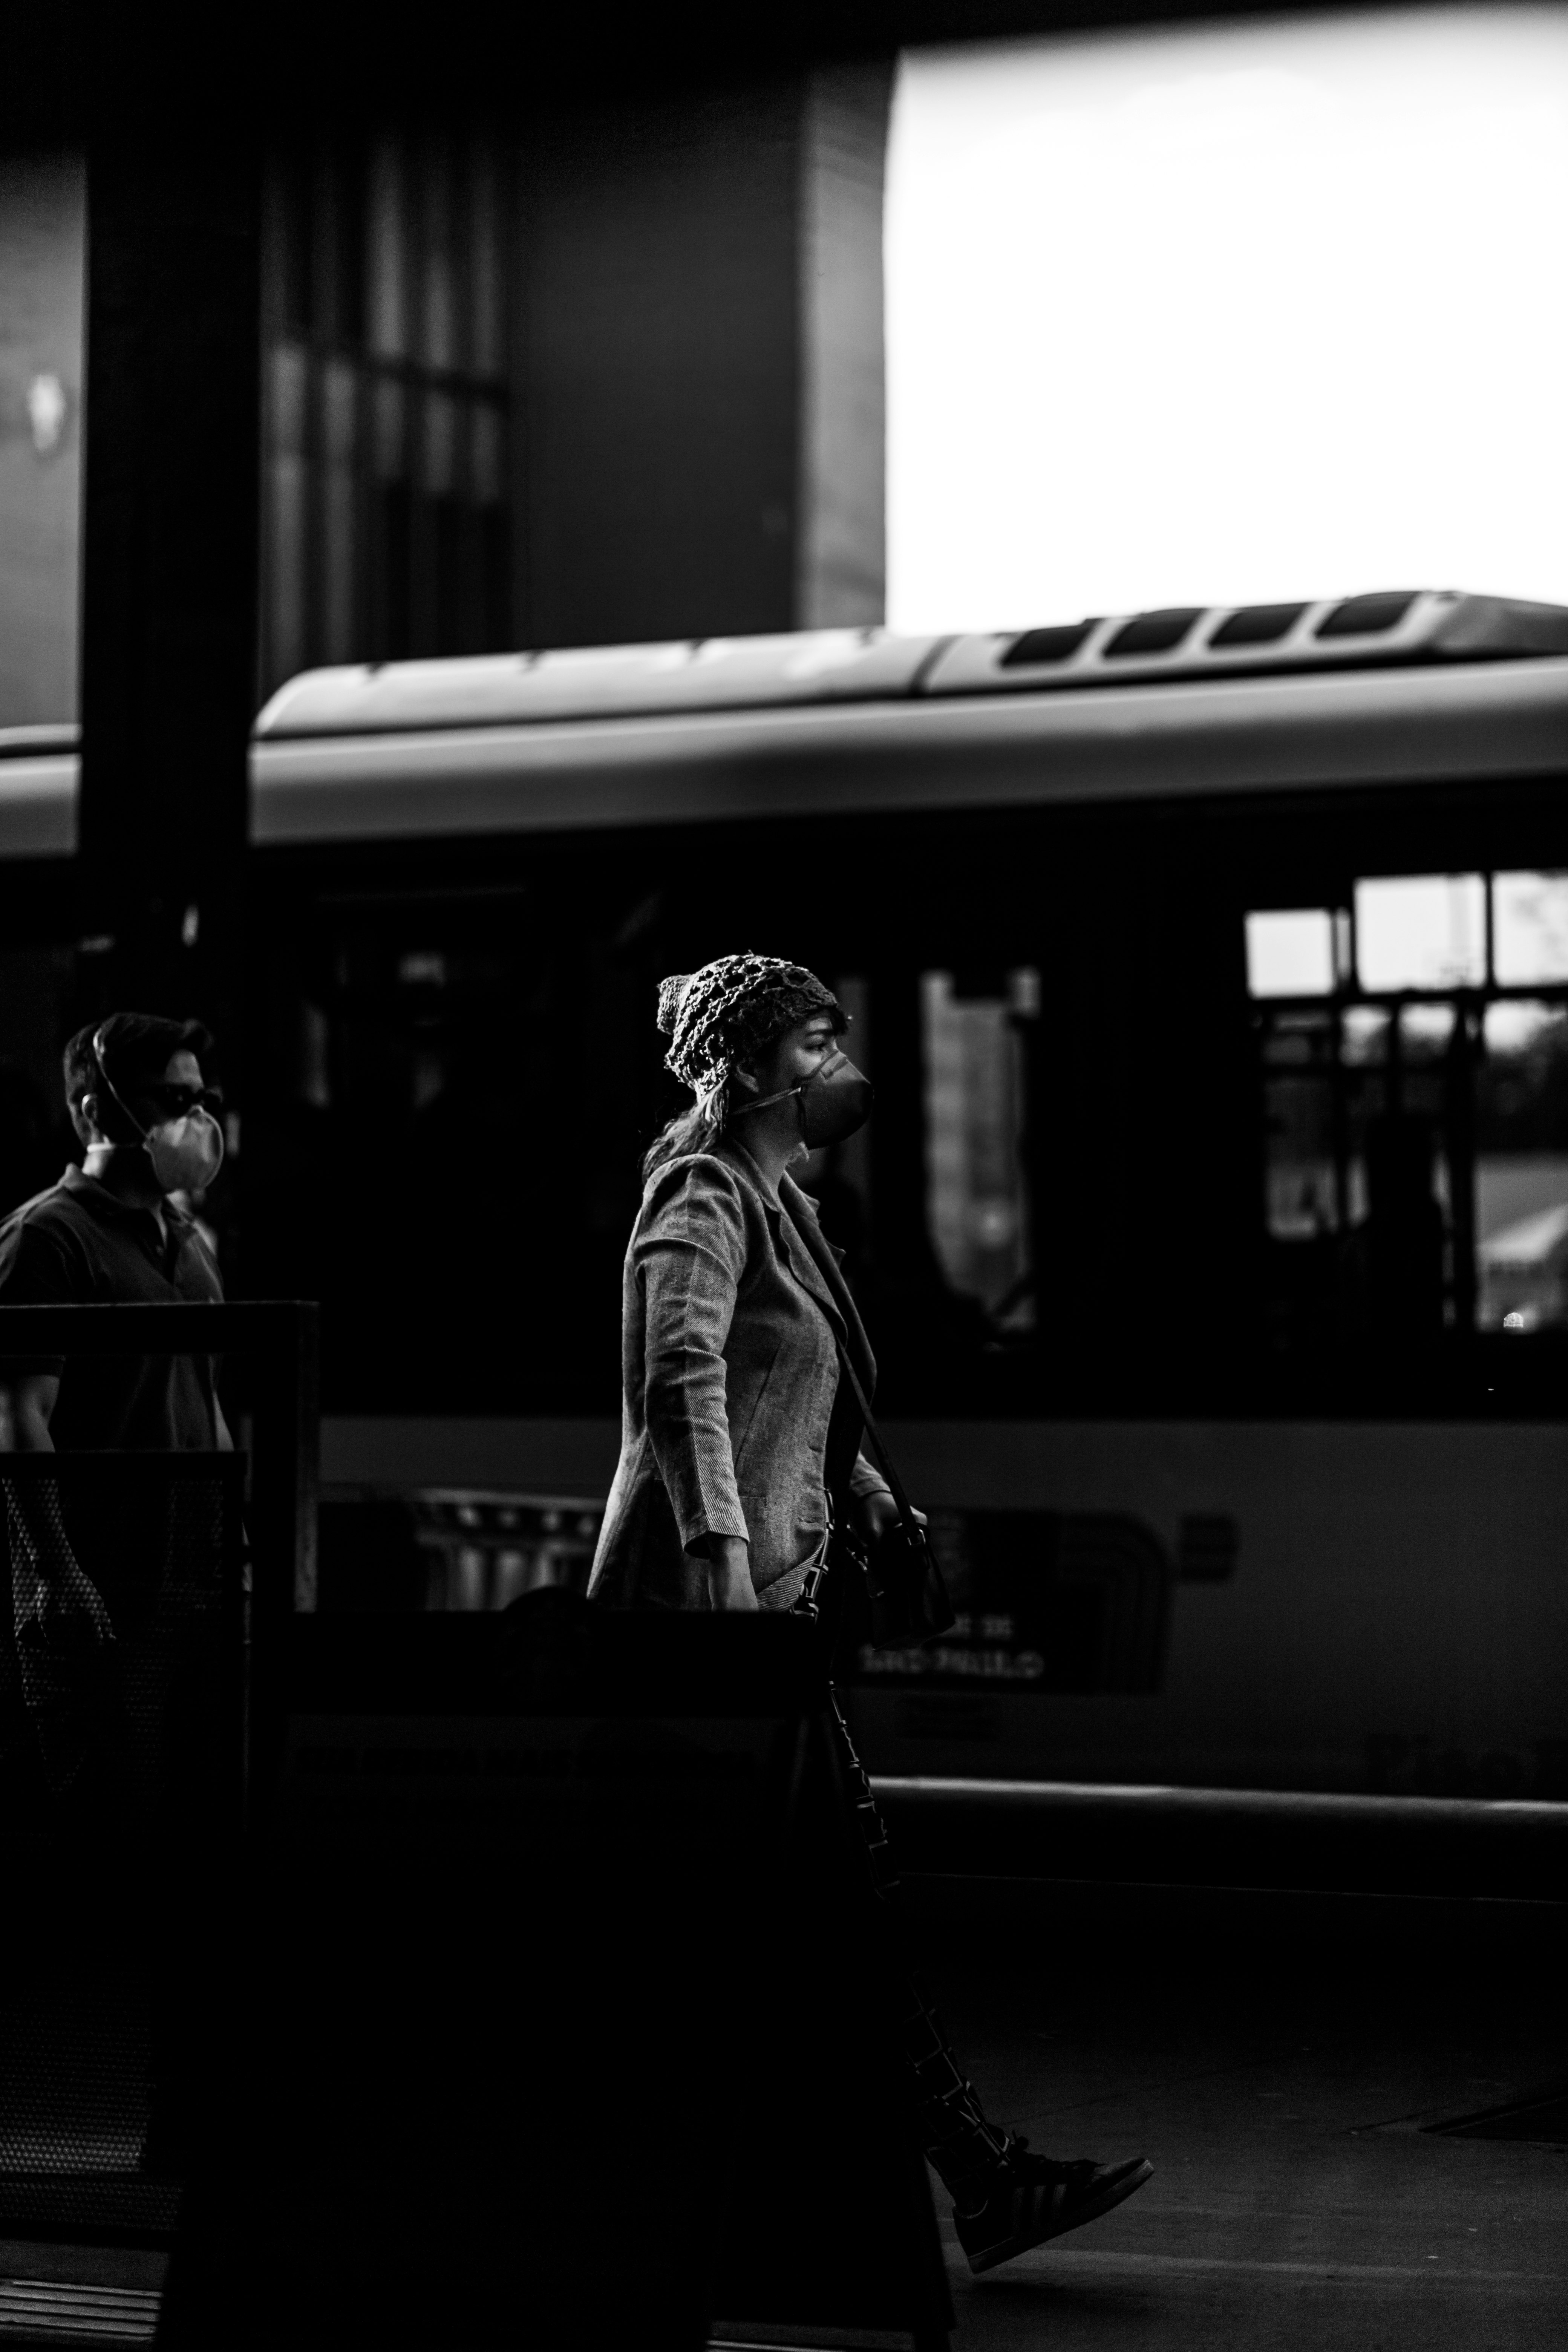 grayscale photo of man and woman standing on train station